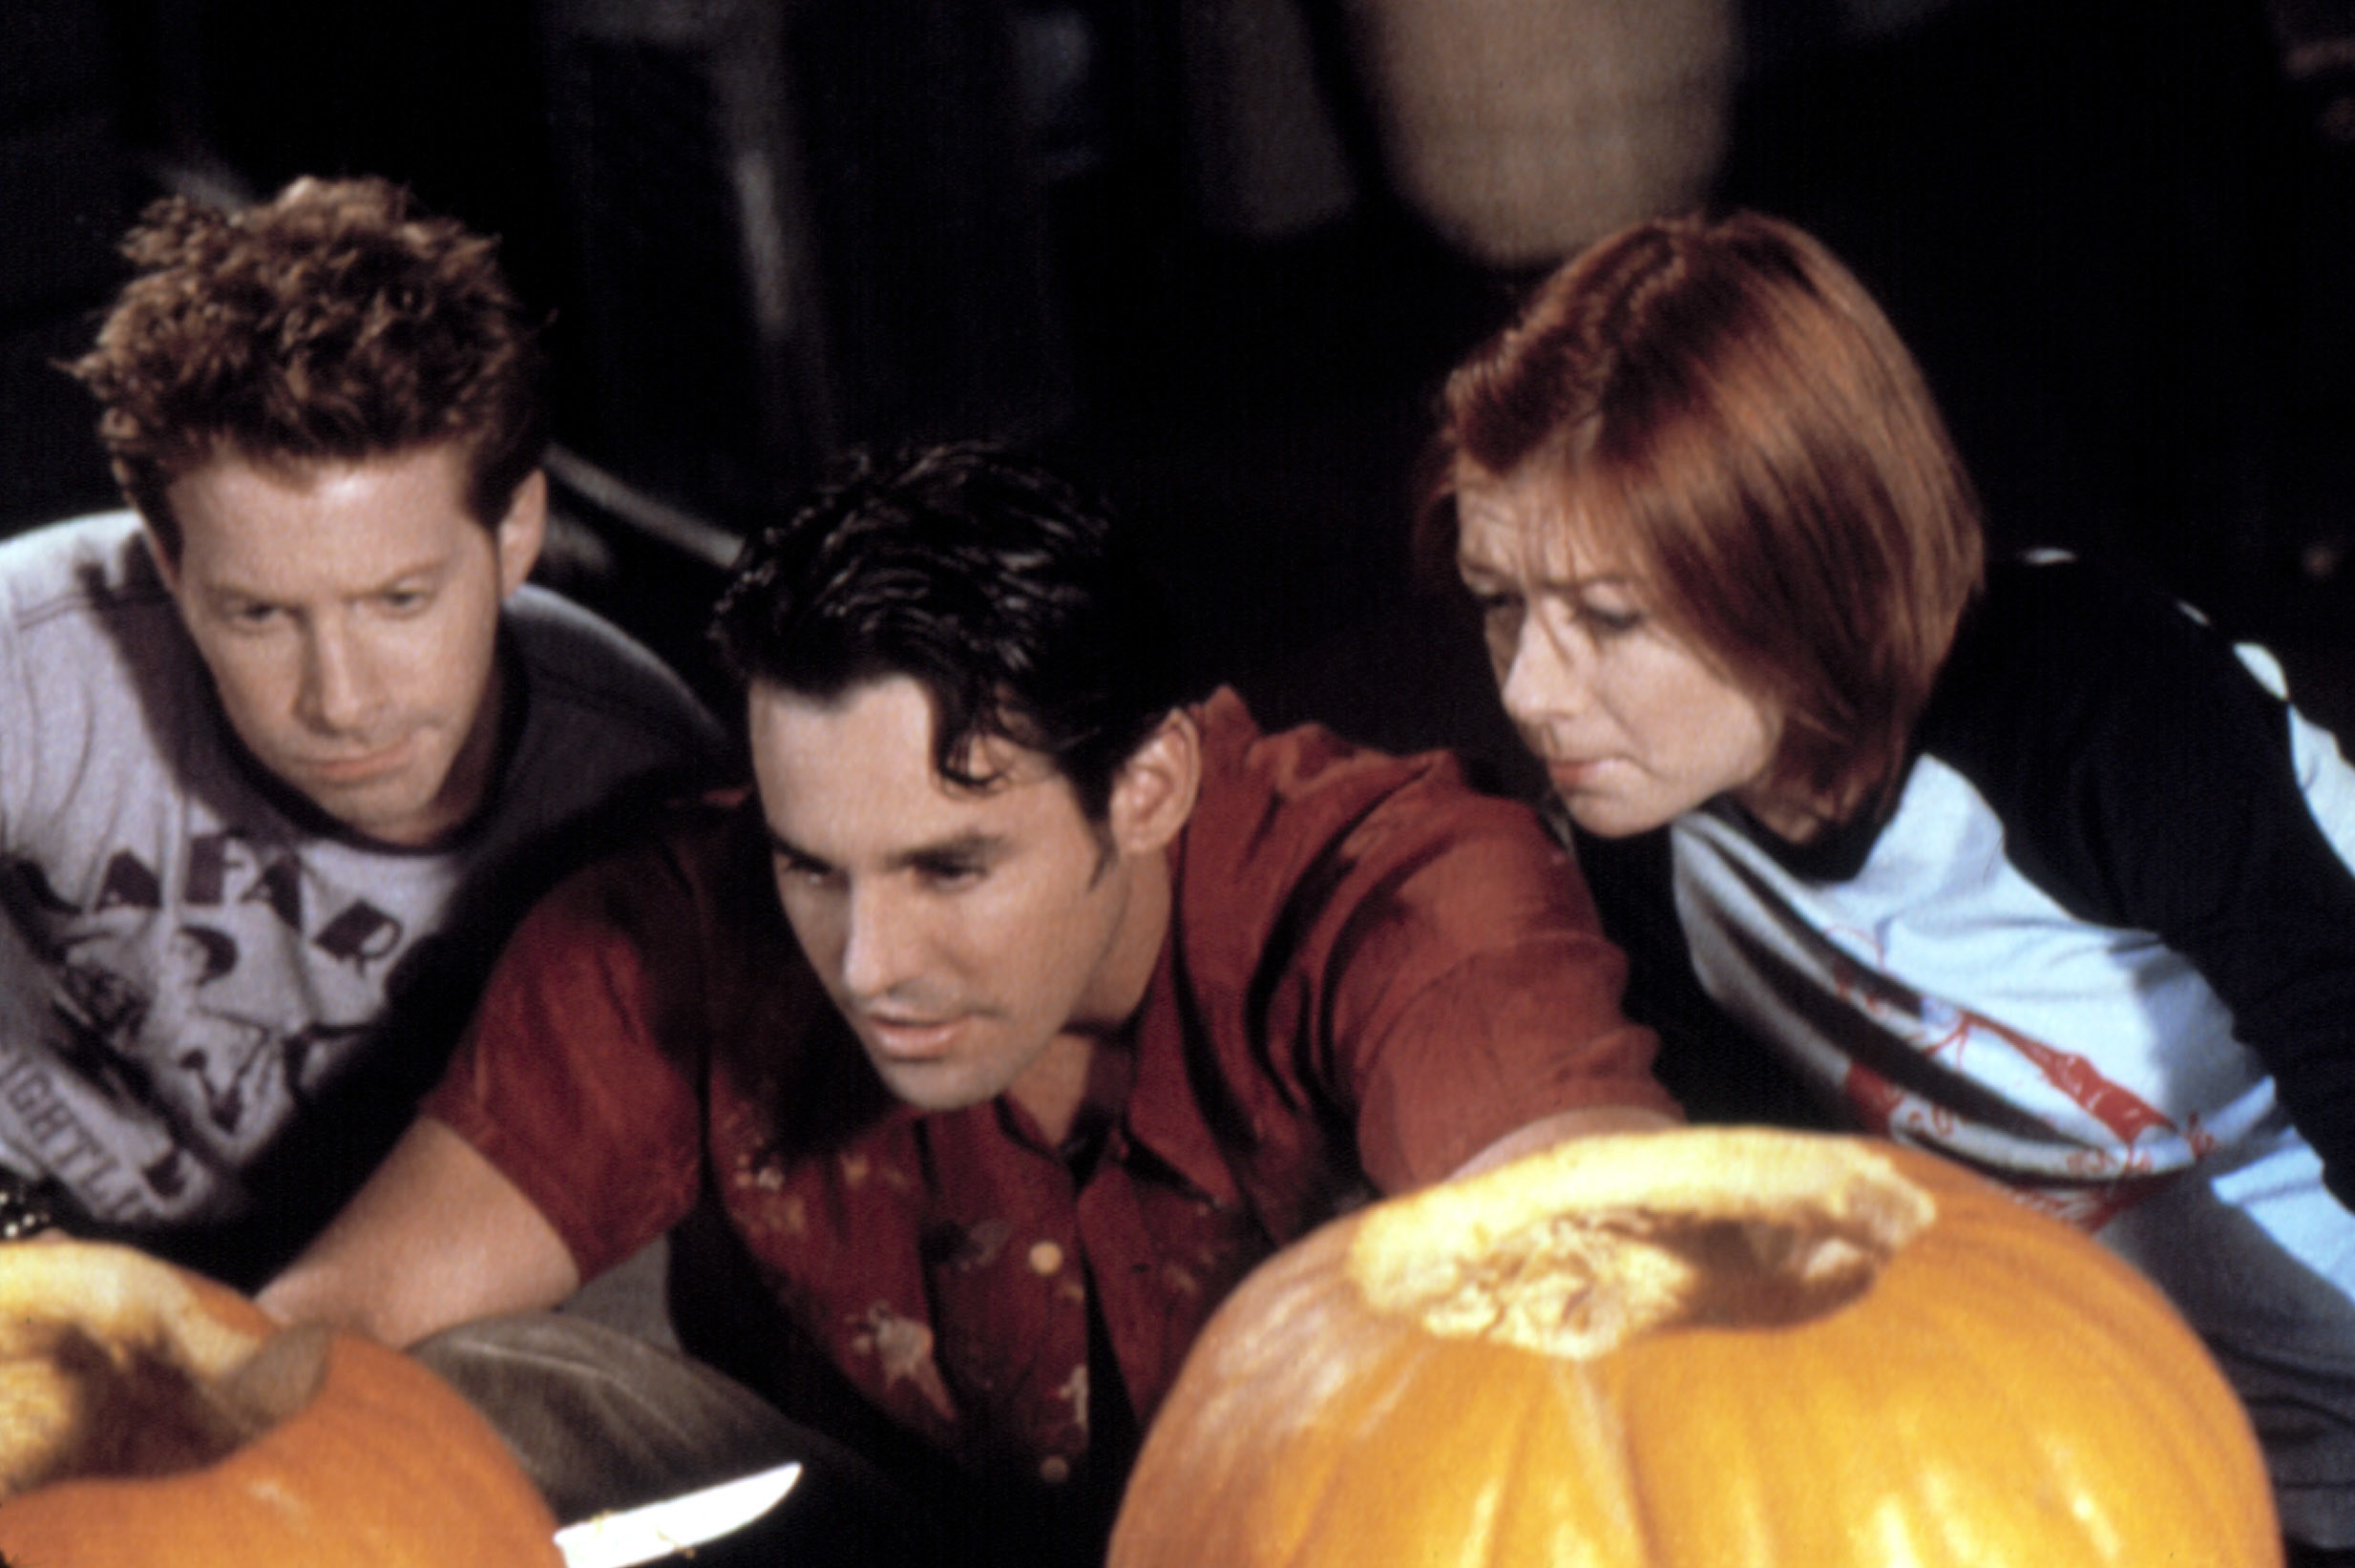 Oz, Xander, and Willow carve pumpkins